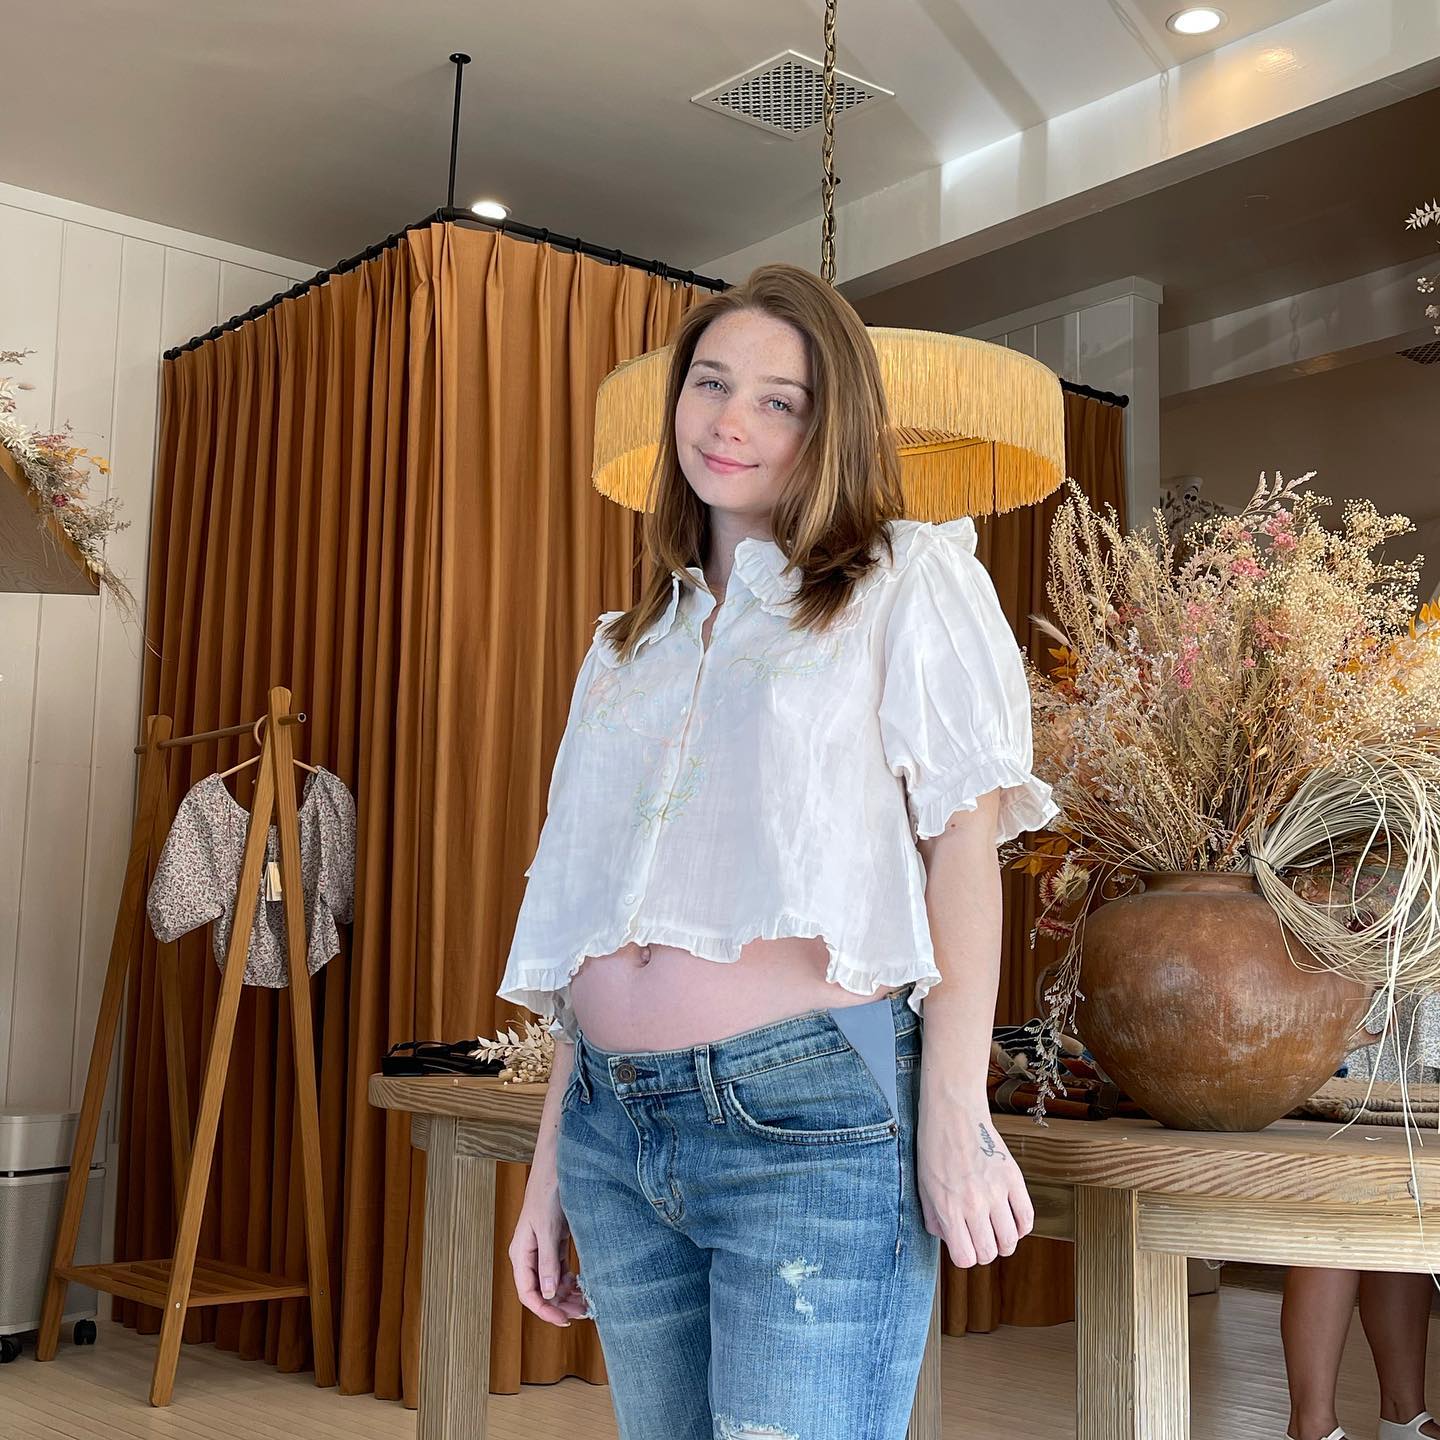 Jessica Barden shows off her baby bump